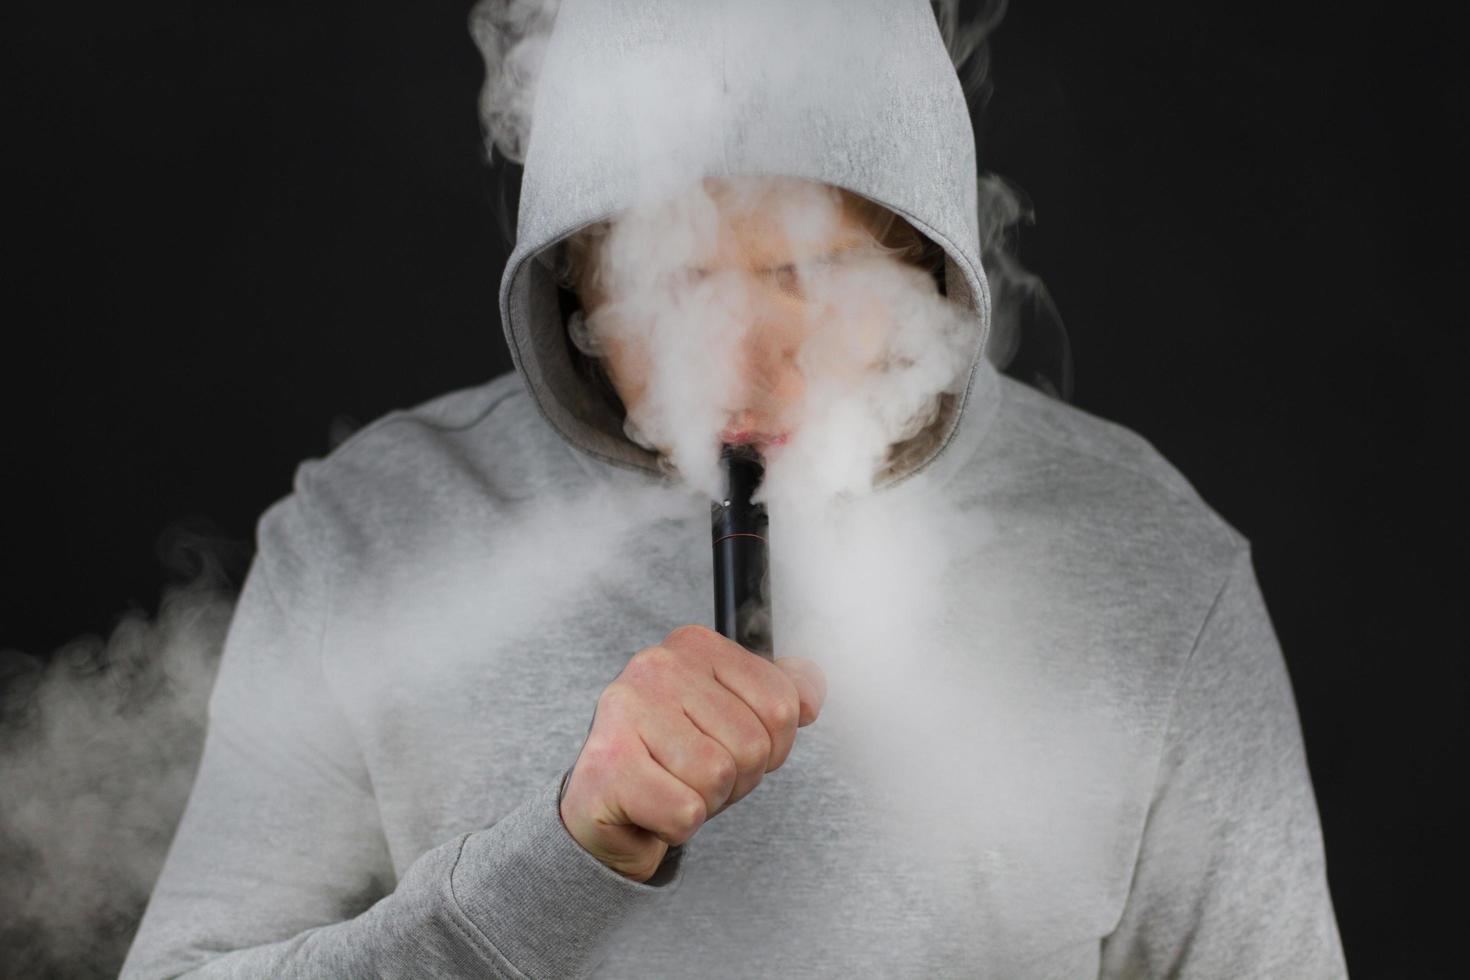 The man smoke an electronic cigarette on the dark background, Men in hoody vaping and releases a cloud of vapor. Guy with vaping on black background photo